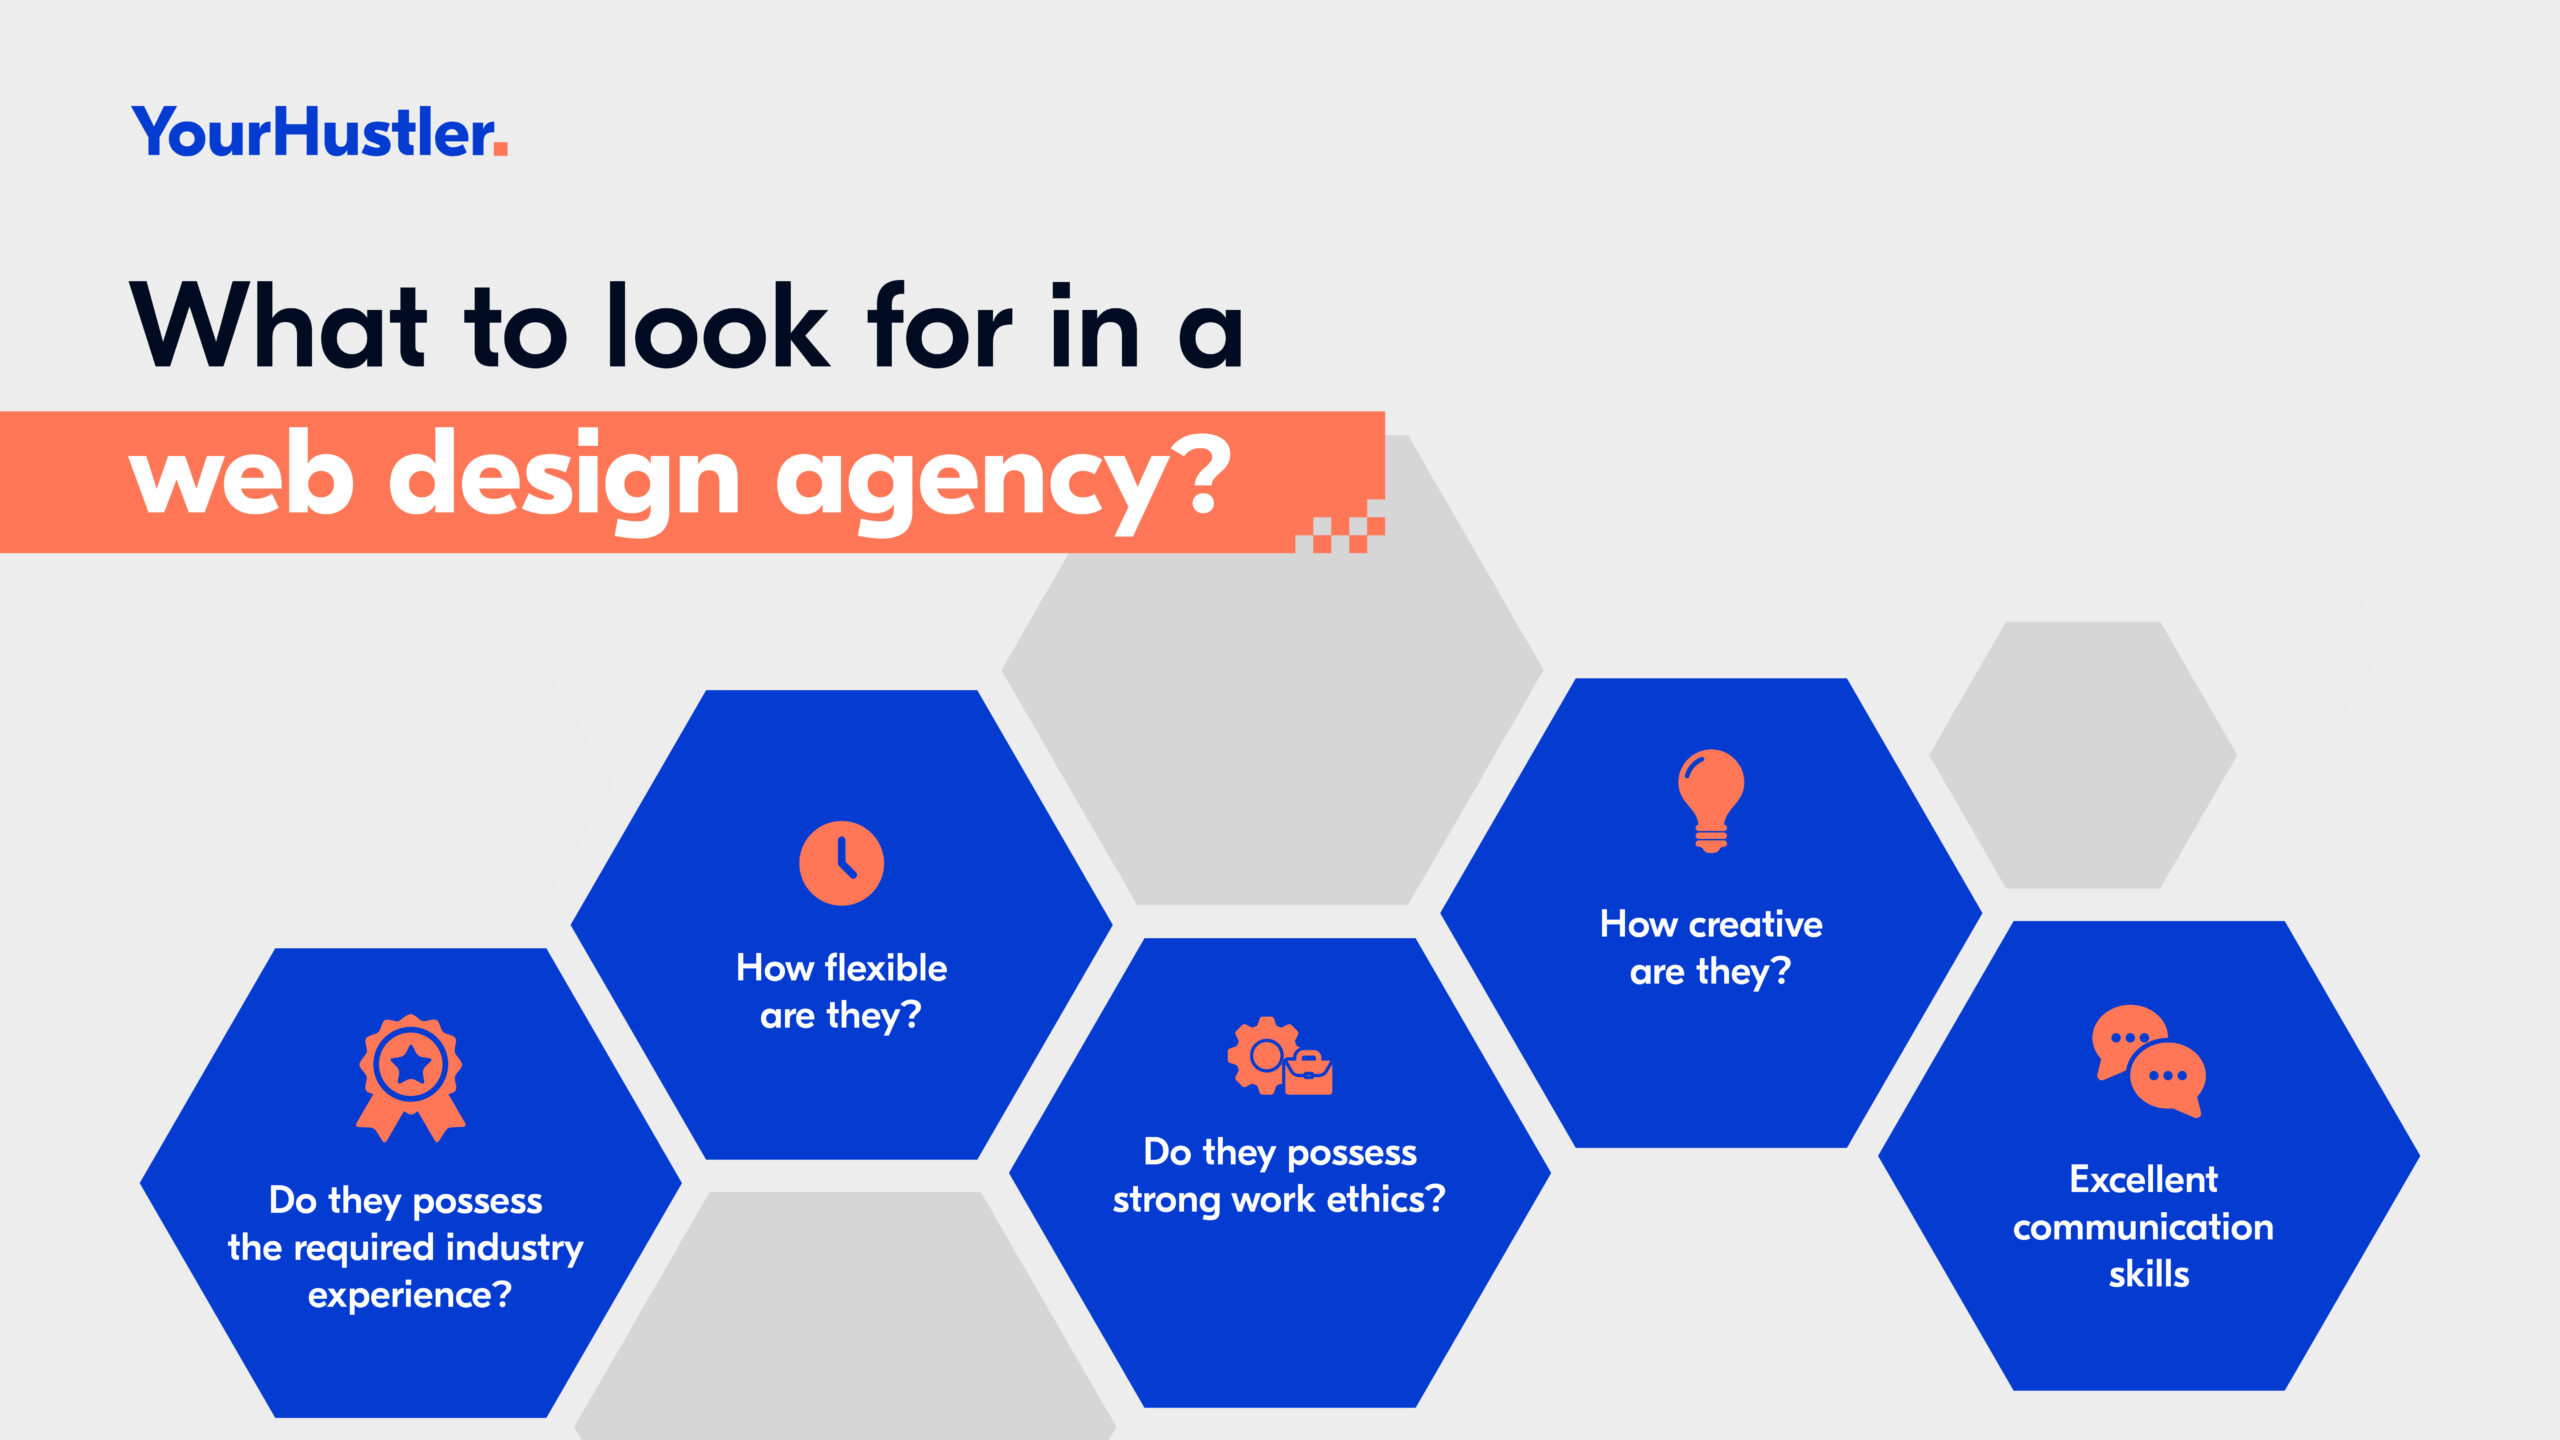 5 important things to look for in a web design agency.